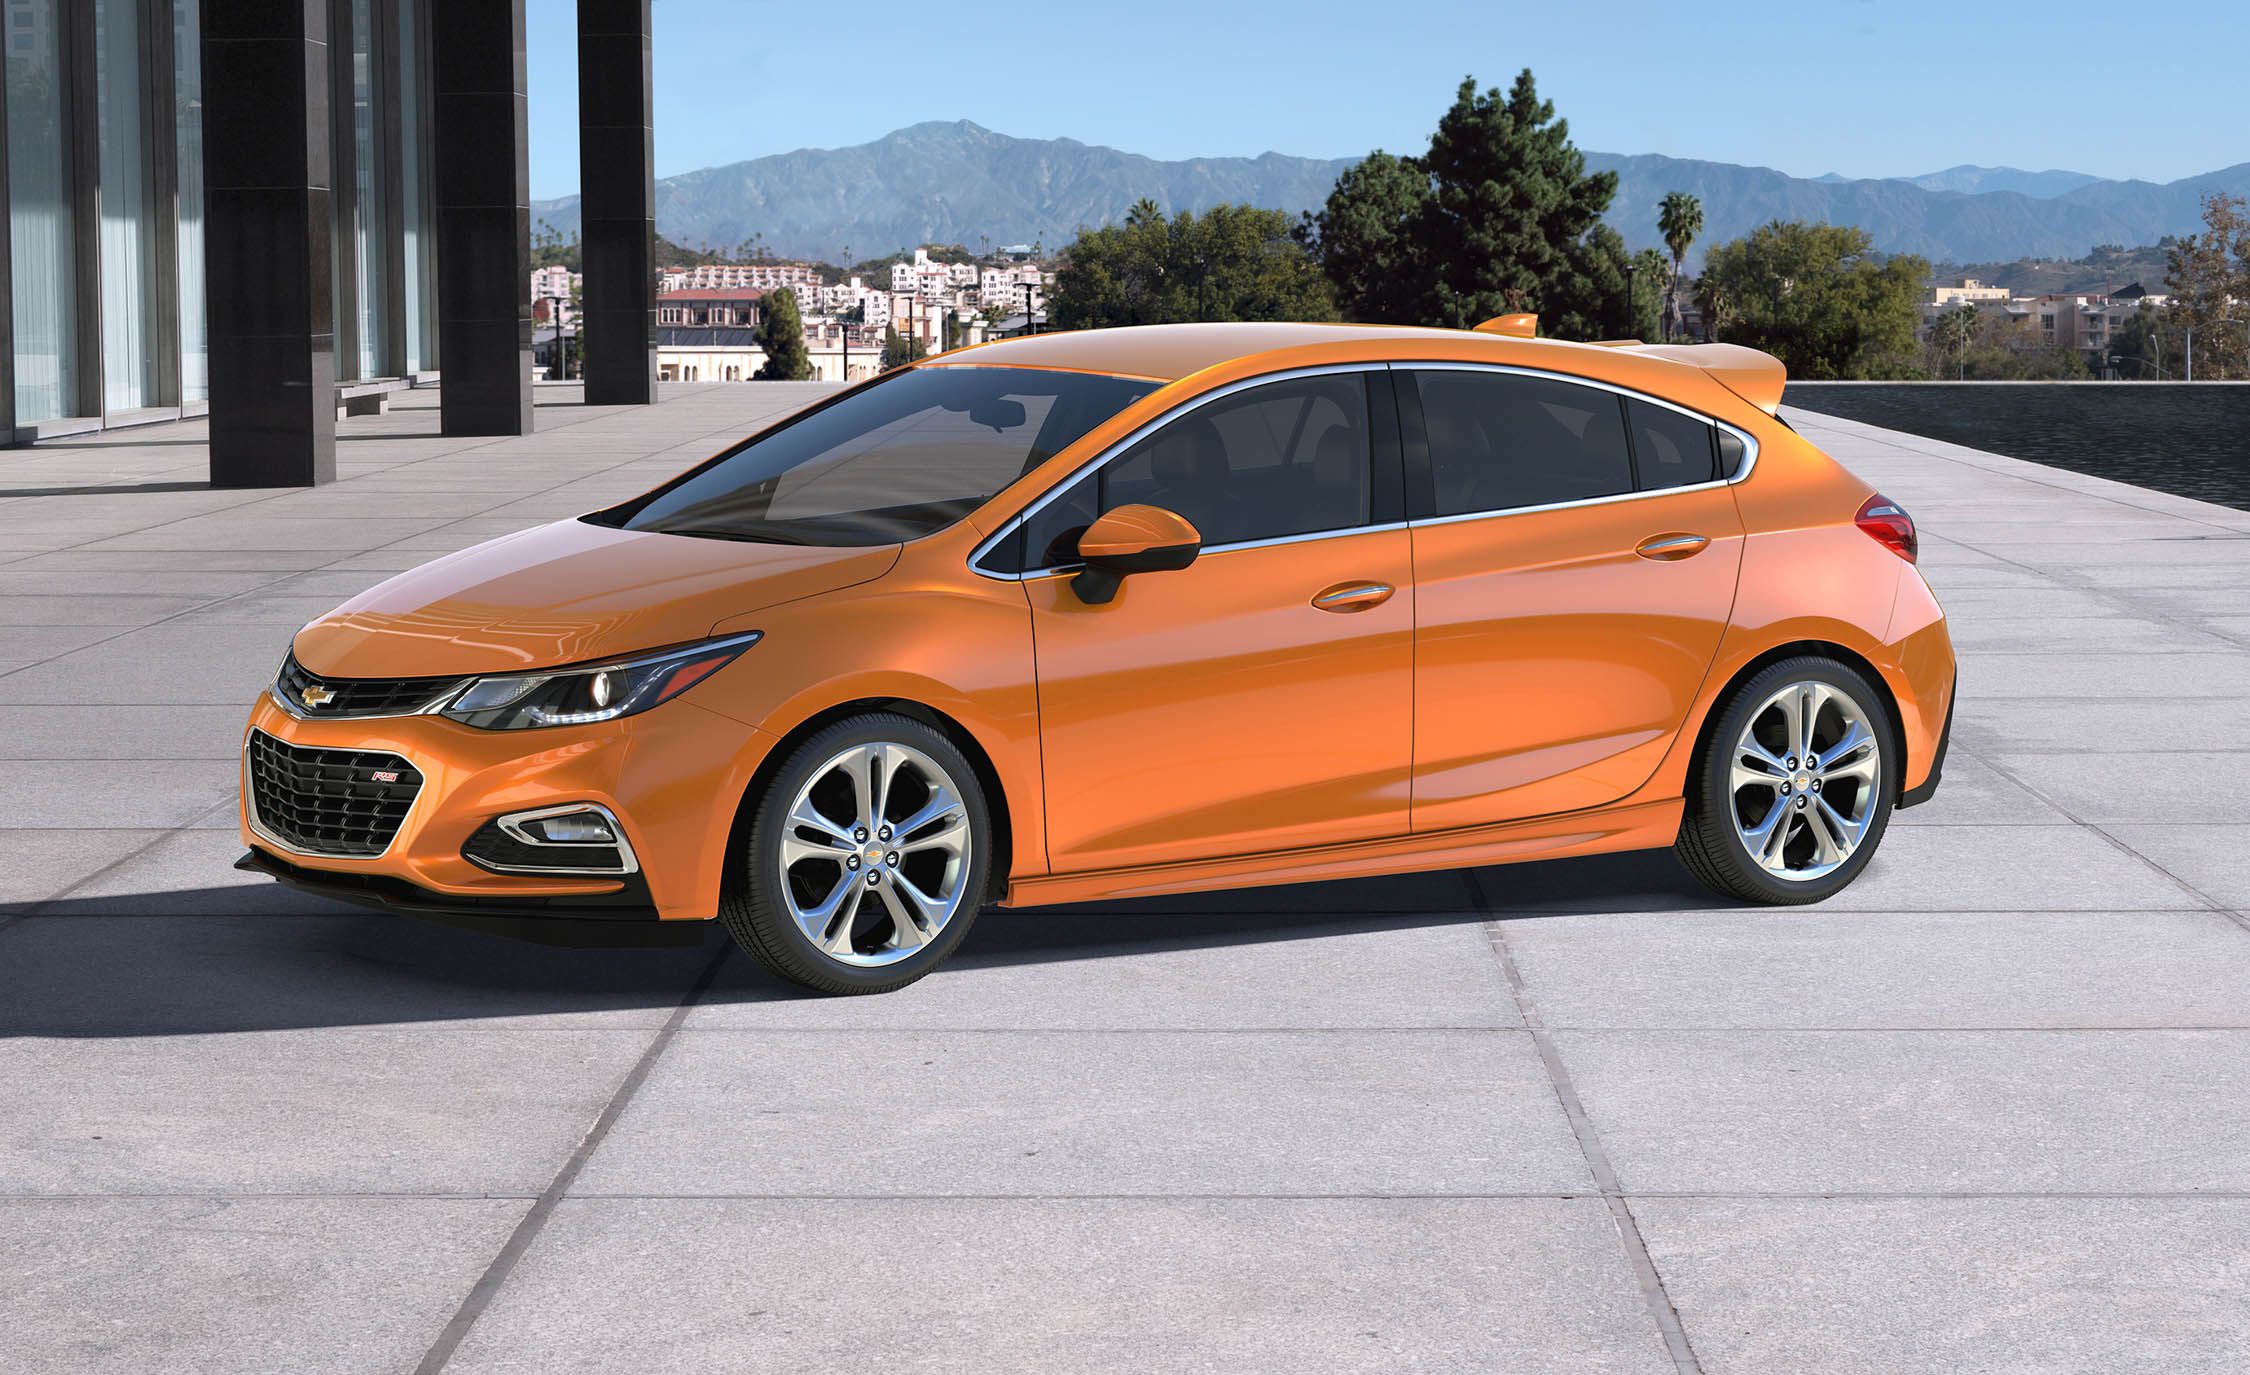 Featured Image of 2017 Chevrolet Cruze Hatchback